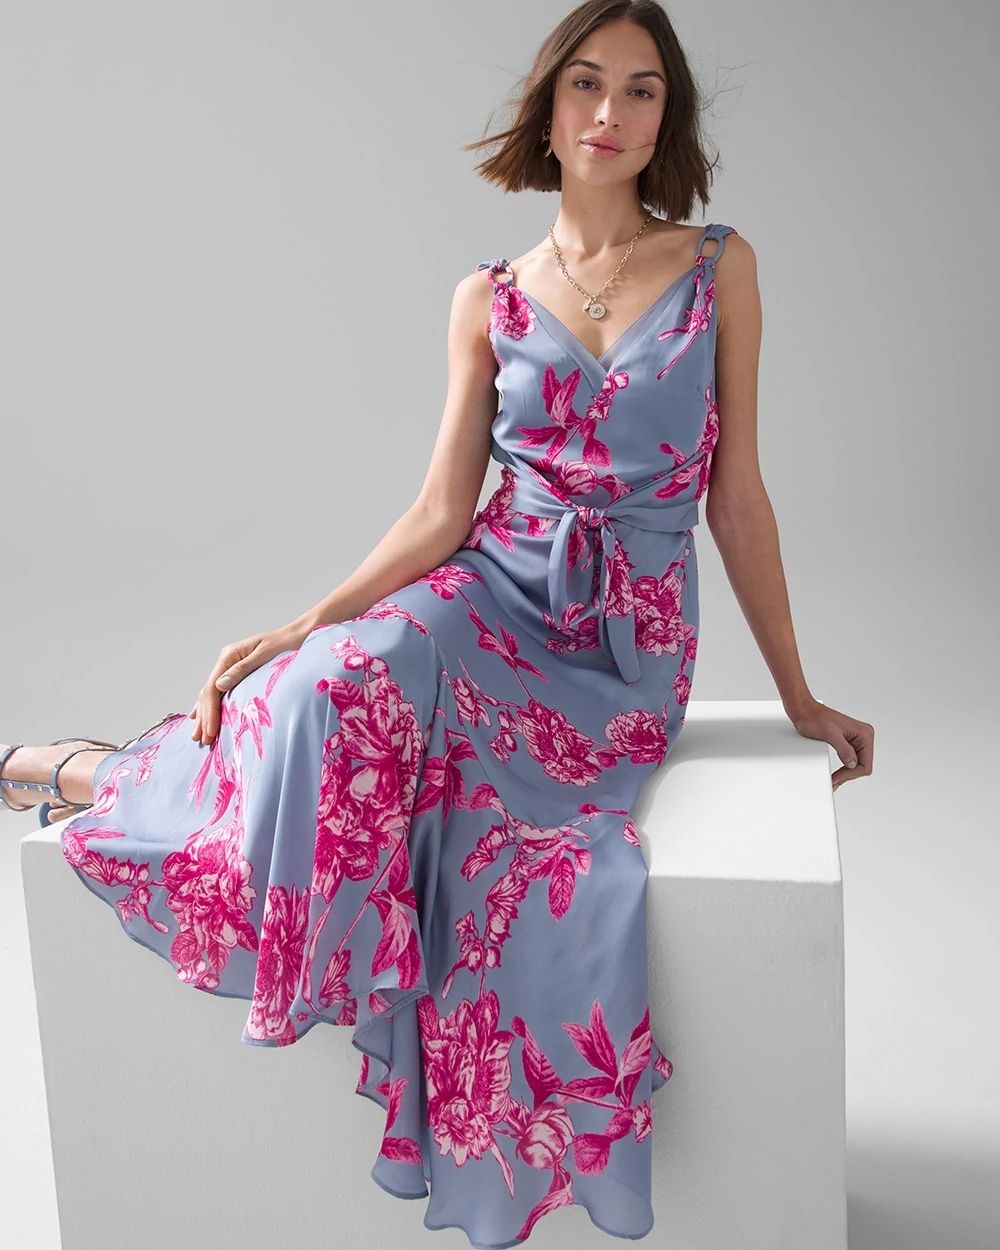 Floral Satin Fit & Flare Dress click to view larger image.